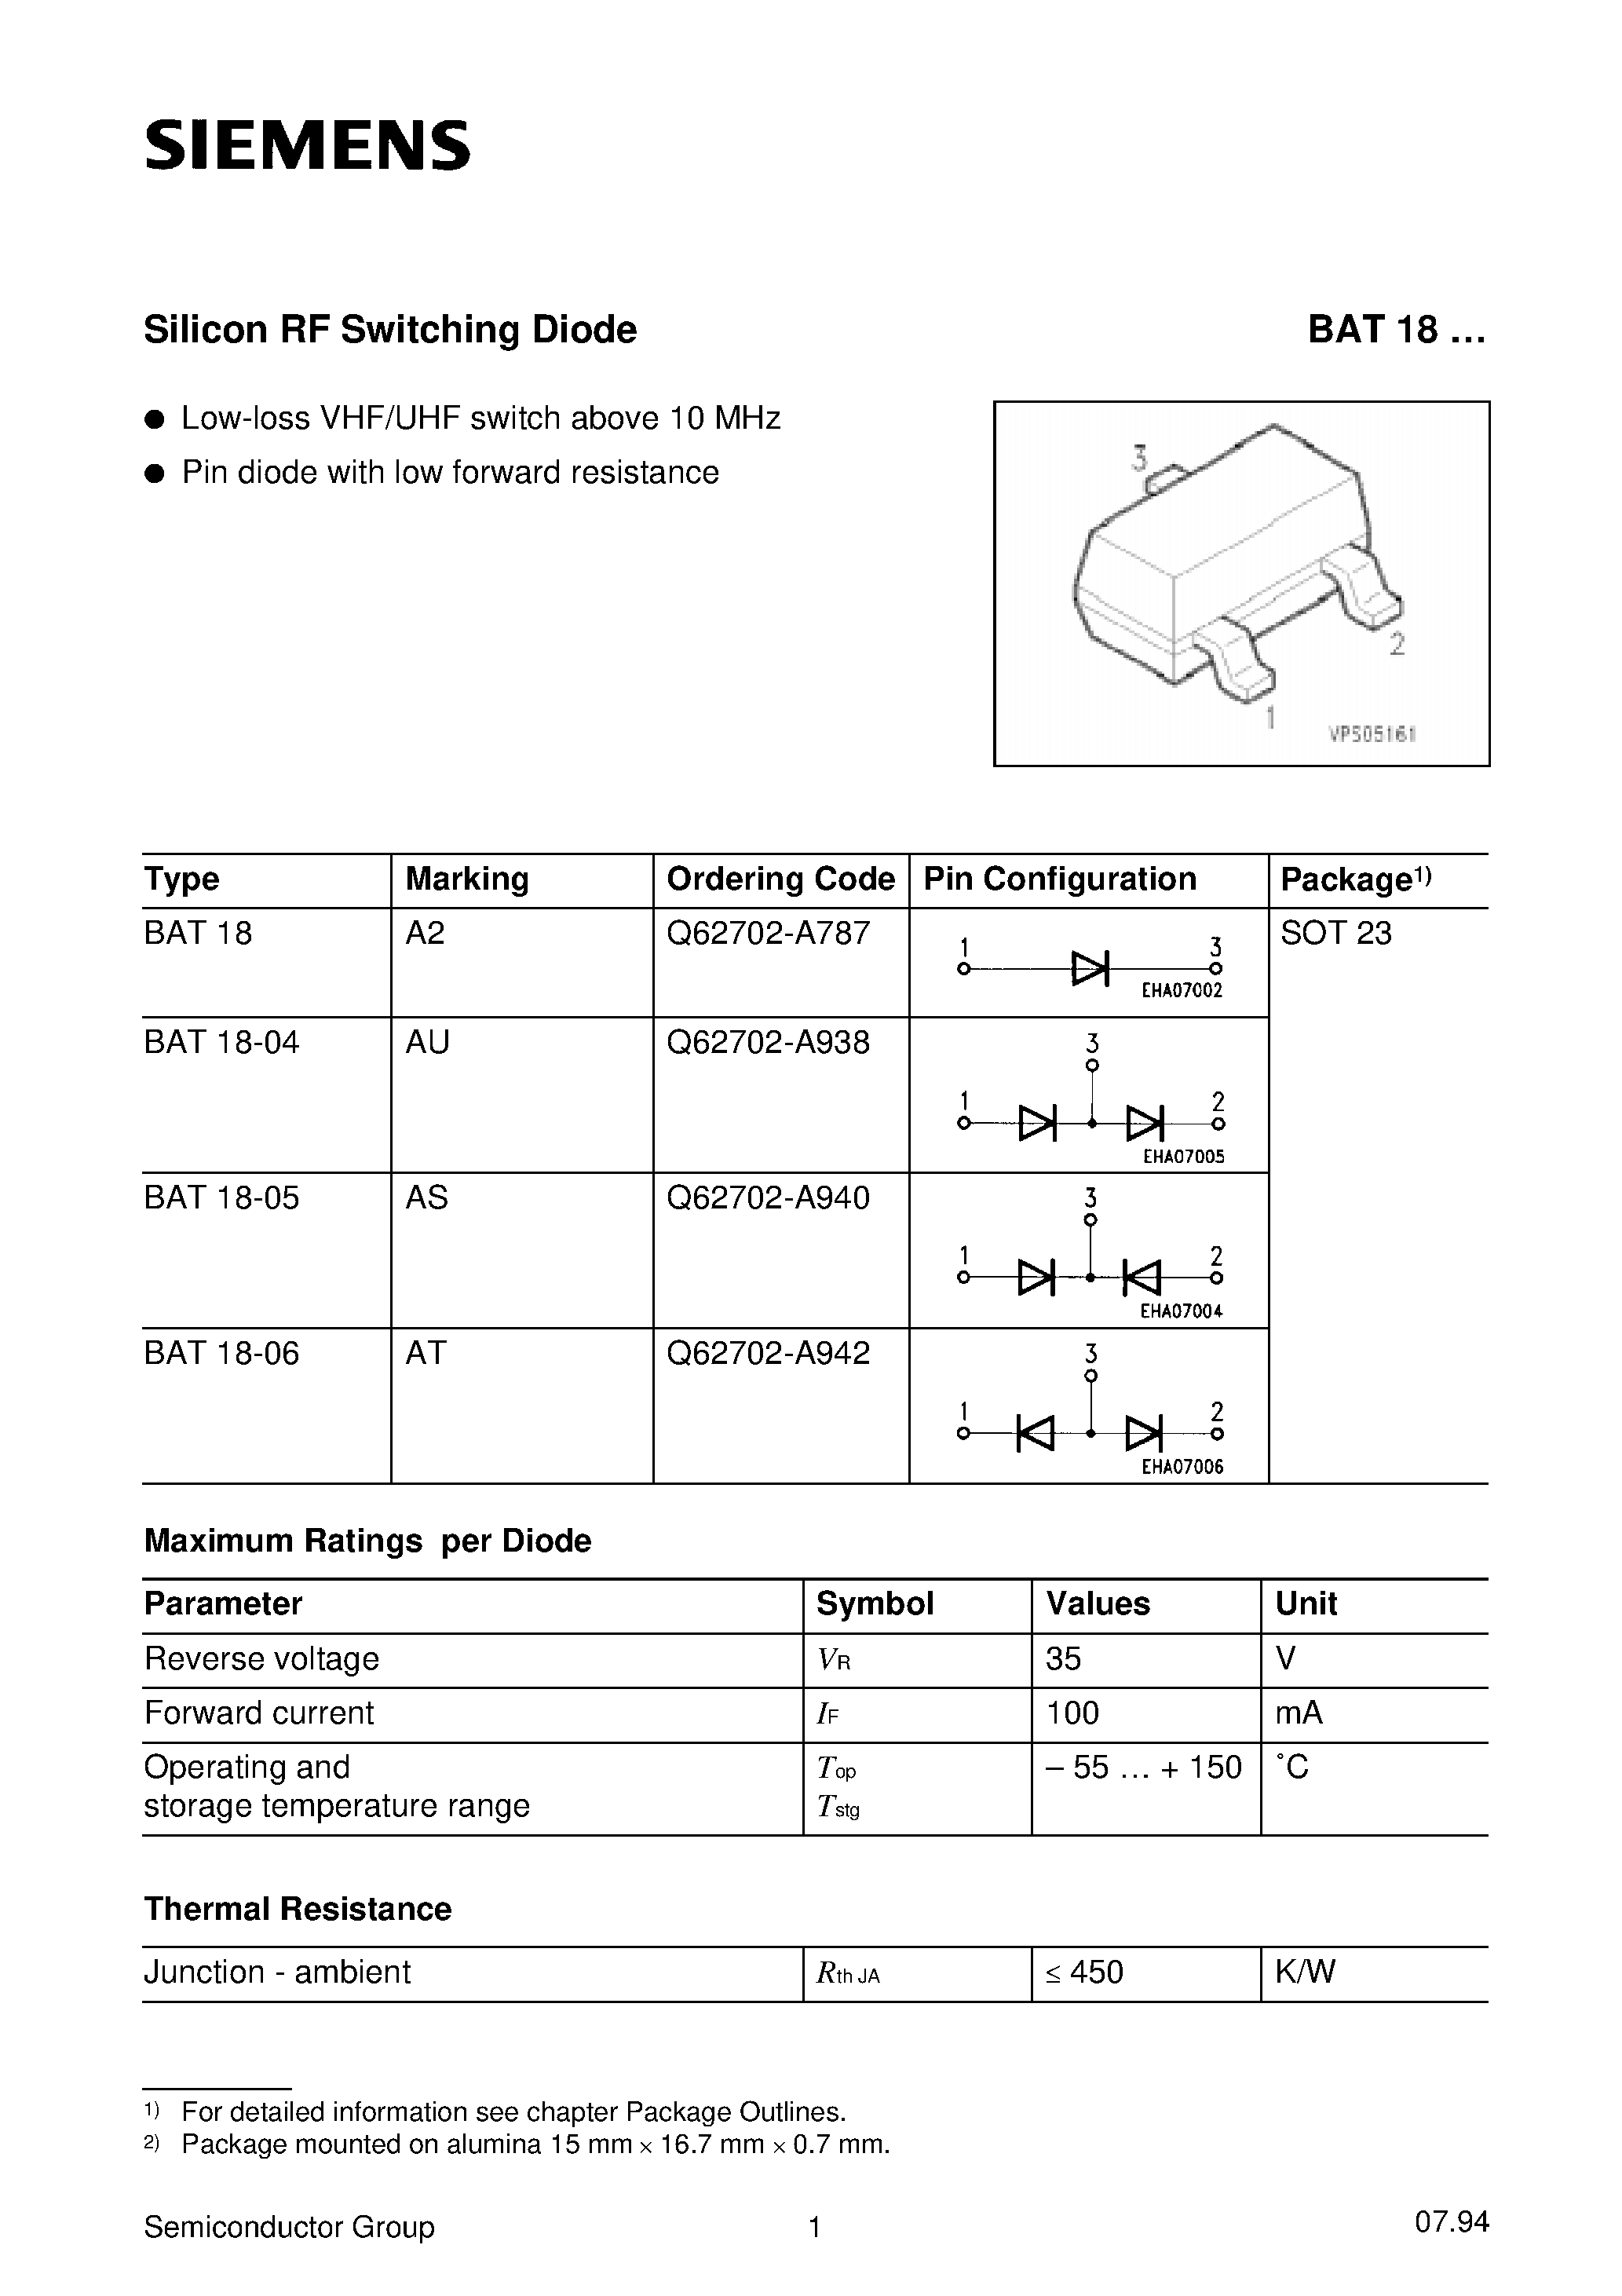 Datasheet BAT18-05 - Silicon RF Switching Diode (Low-loss VHF/UHF switch above 10 MHz Pin diode with low forward resistance) page 1